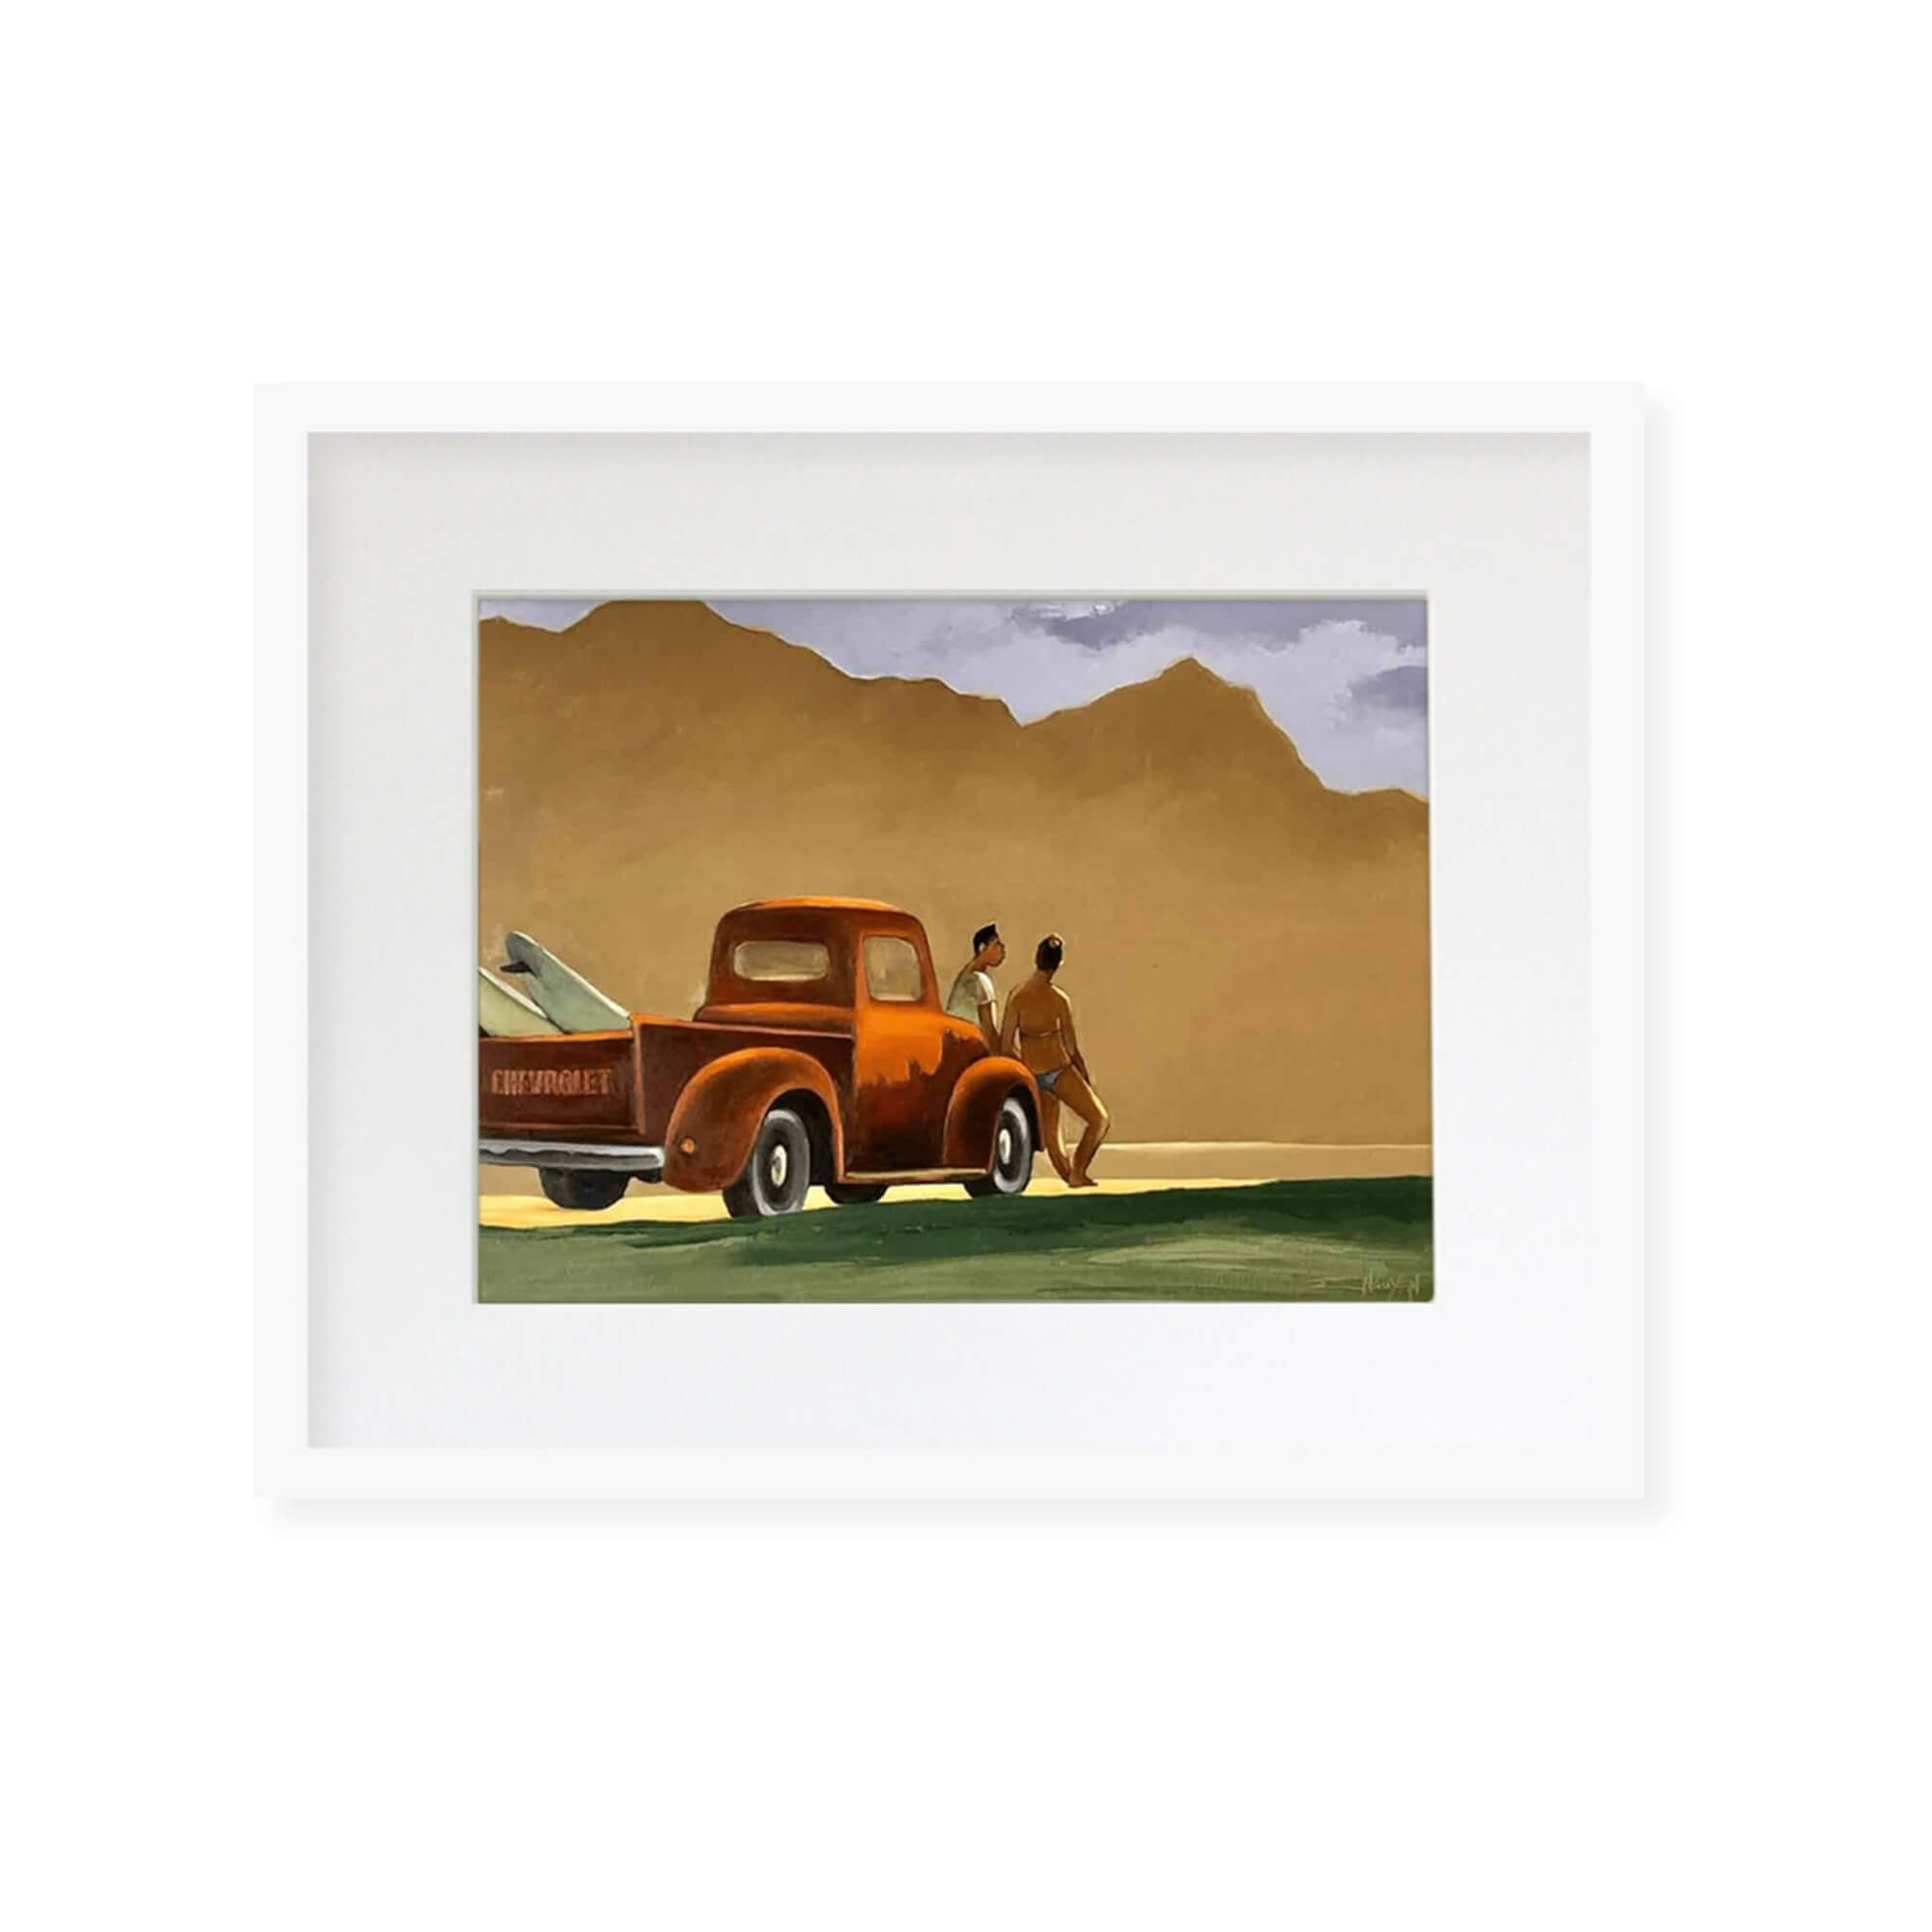 Framed matted art print of a local couple relaxing by their Chevrolet pickup after a surf session by Hawaii artist Tim Nguyen